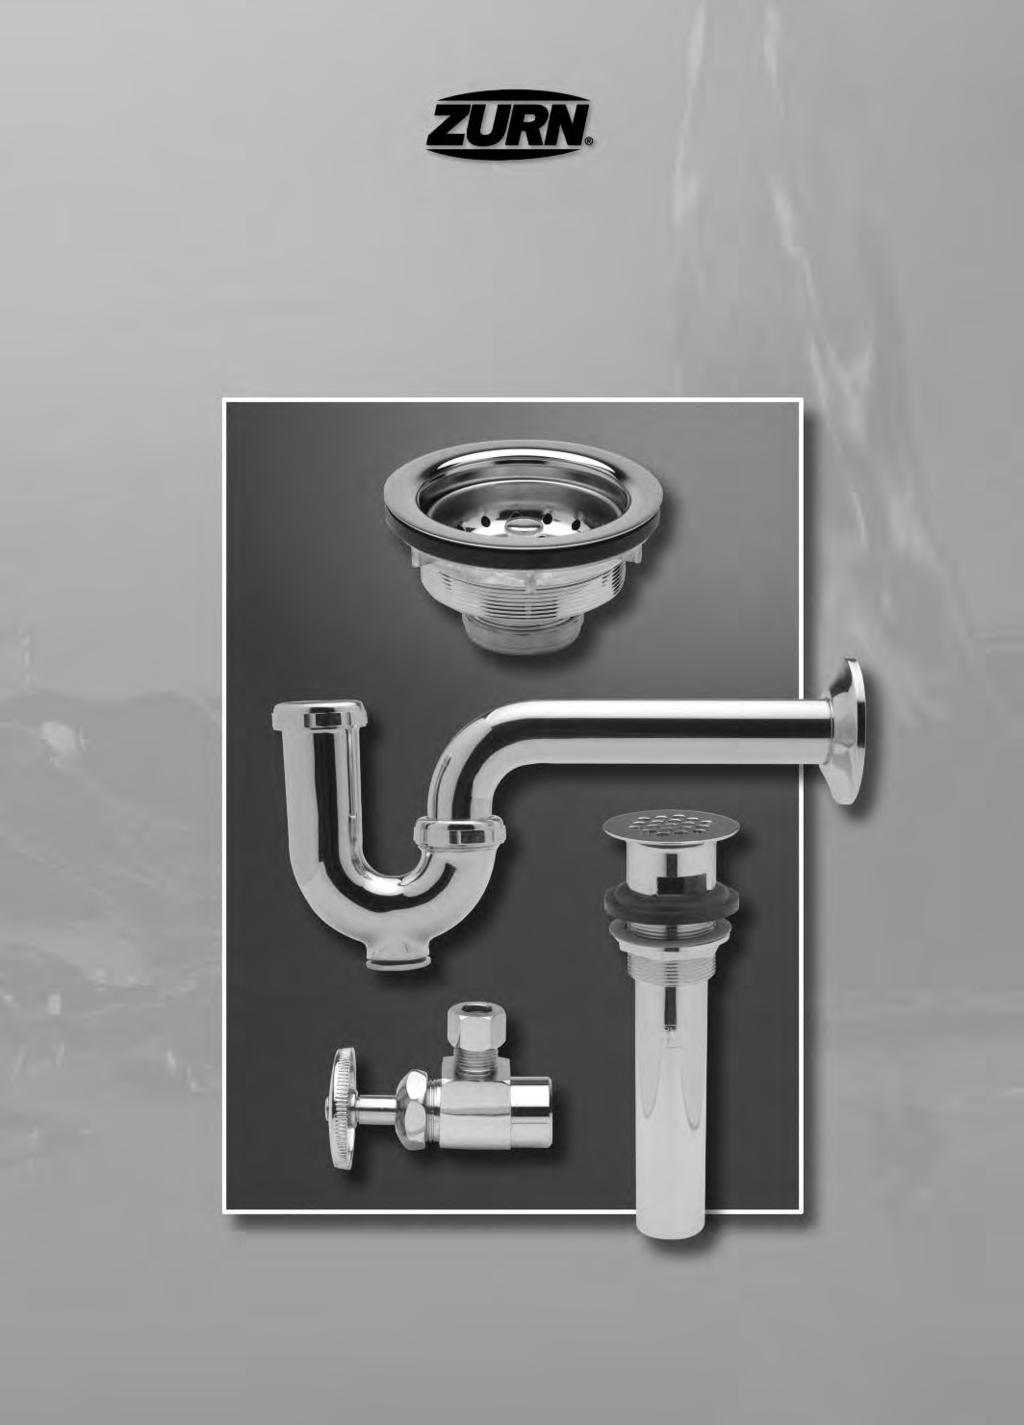 TUBULAR BRASS PLUMBING PRODUCTS PRICE GUIDE